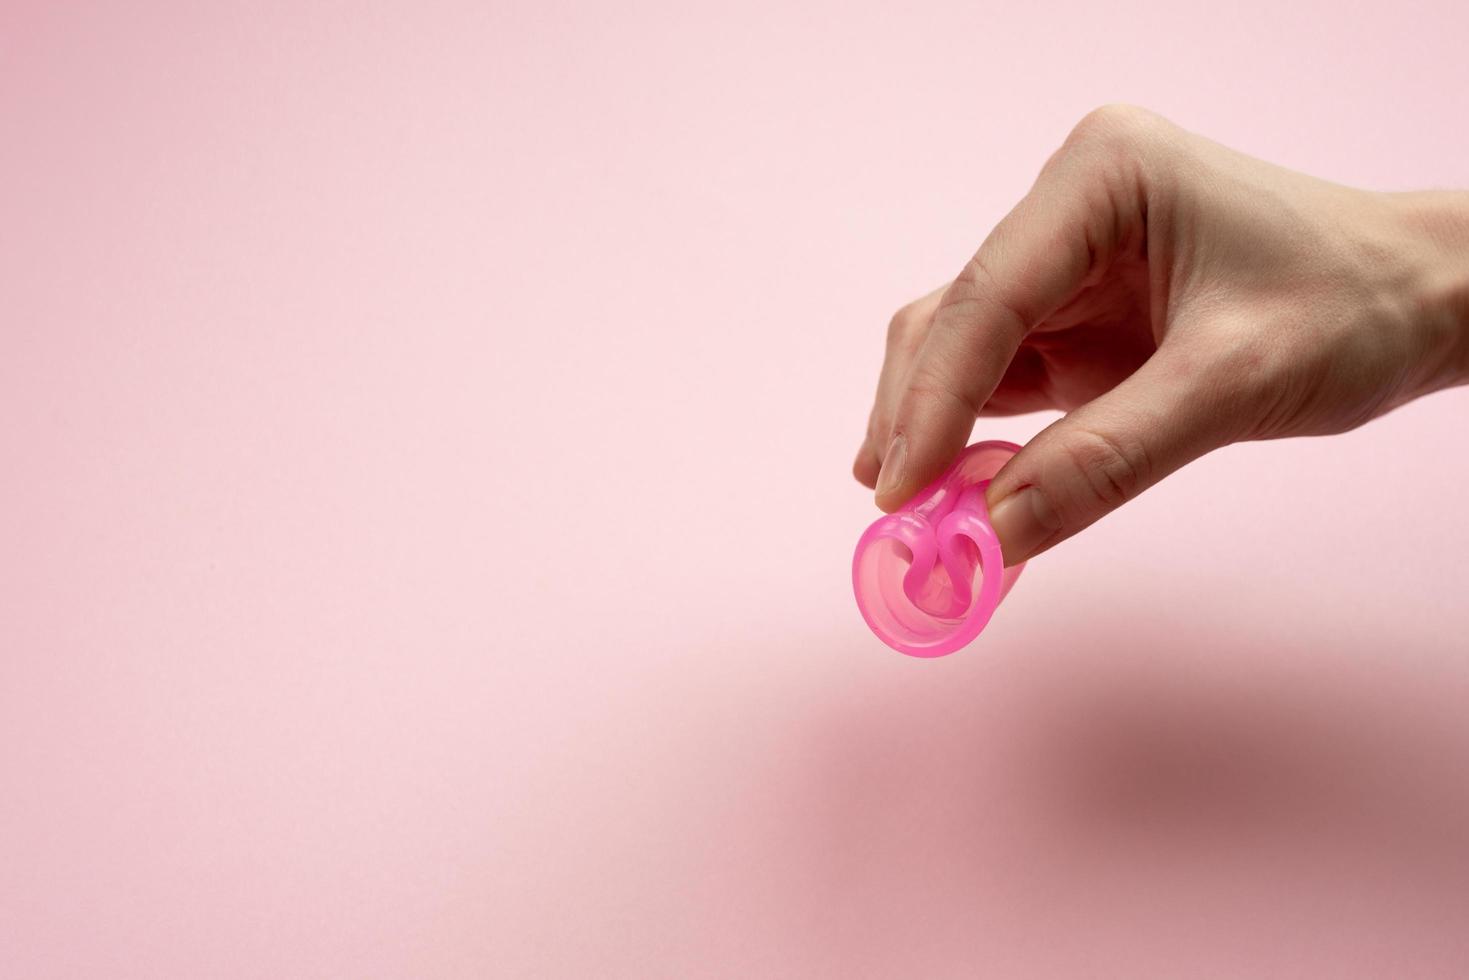 Female hands show how to use a menstrual cup. photo